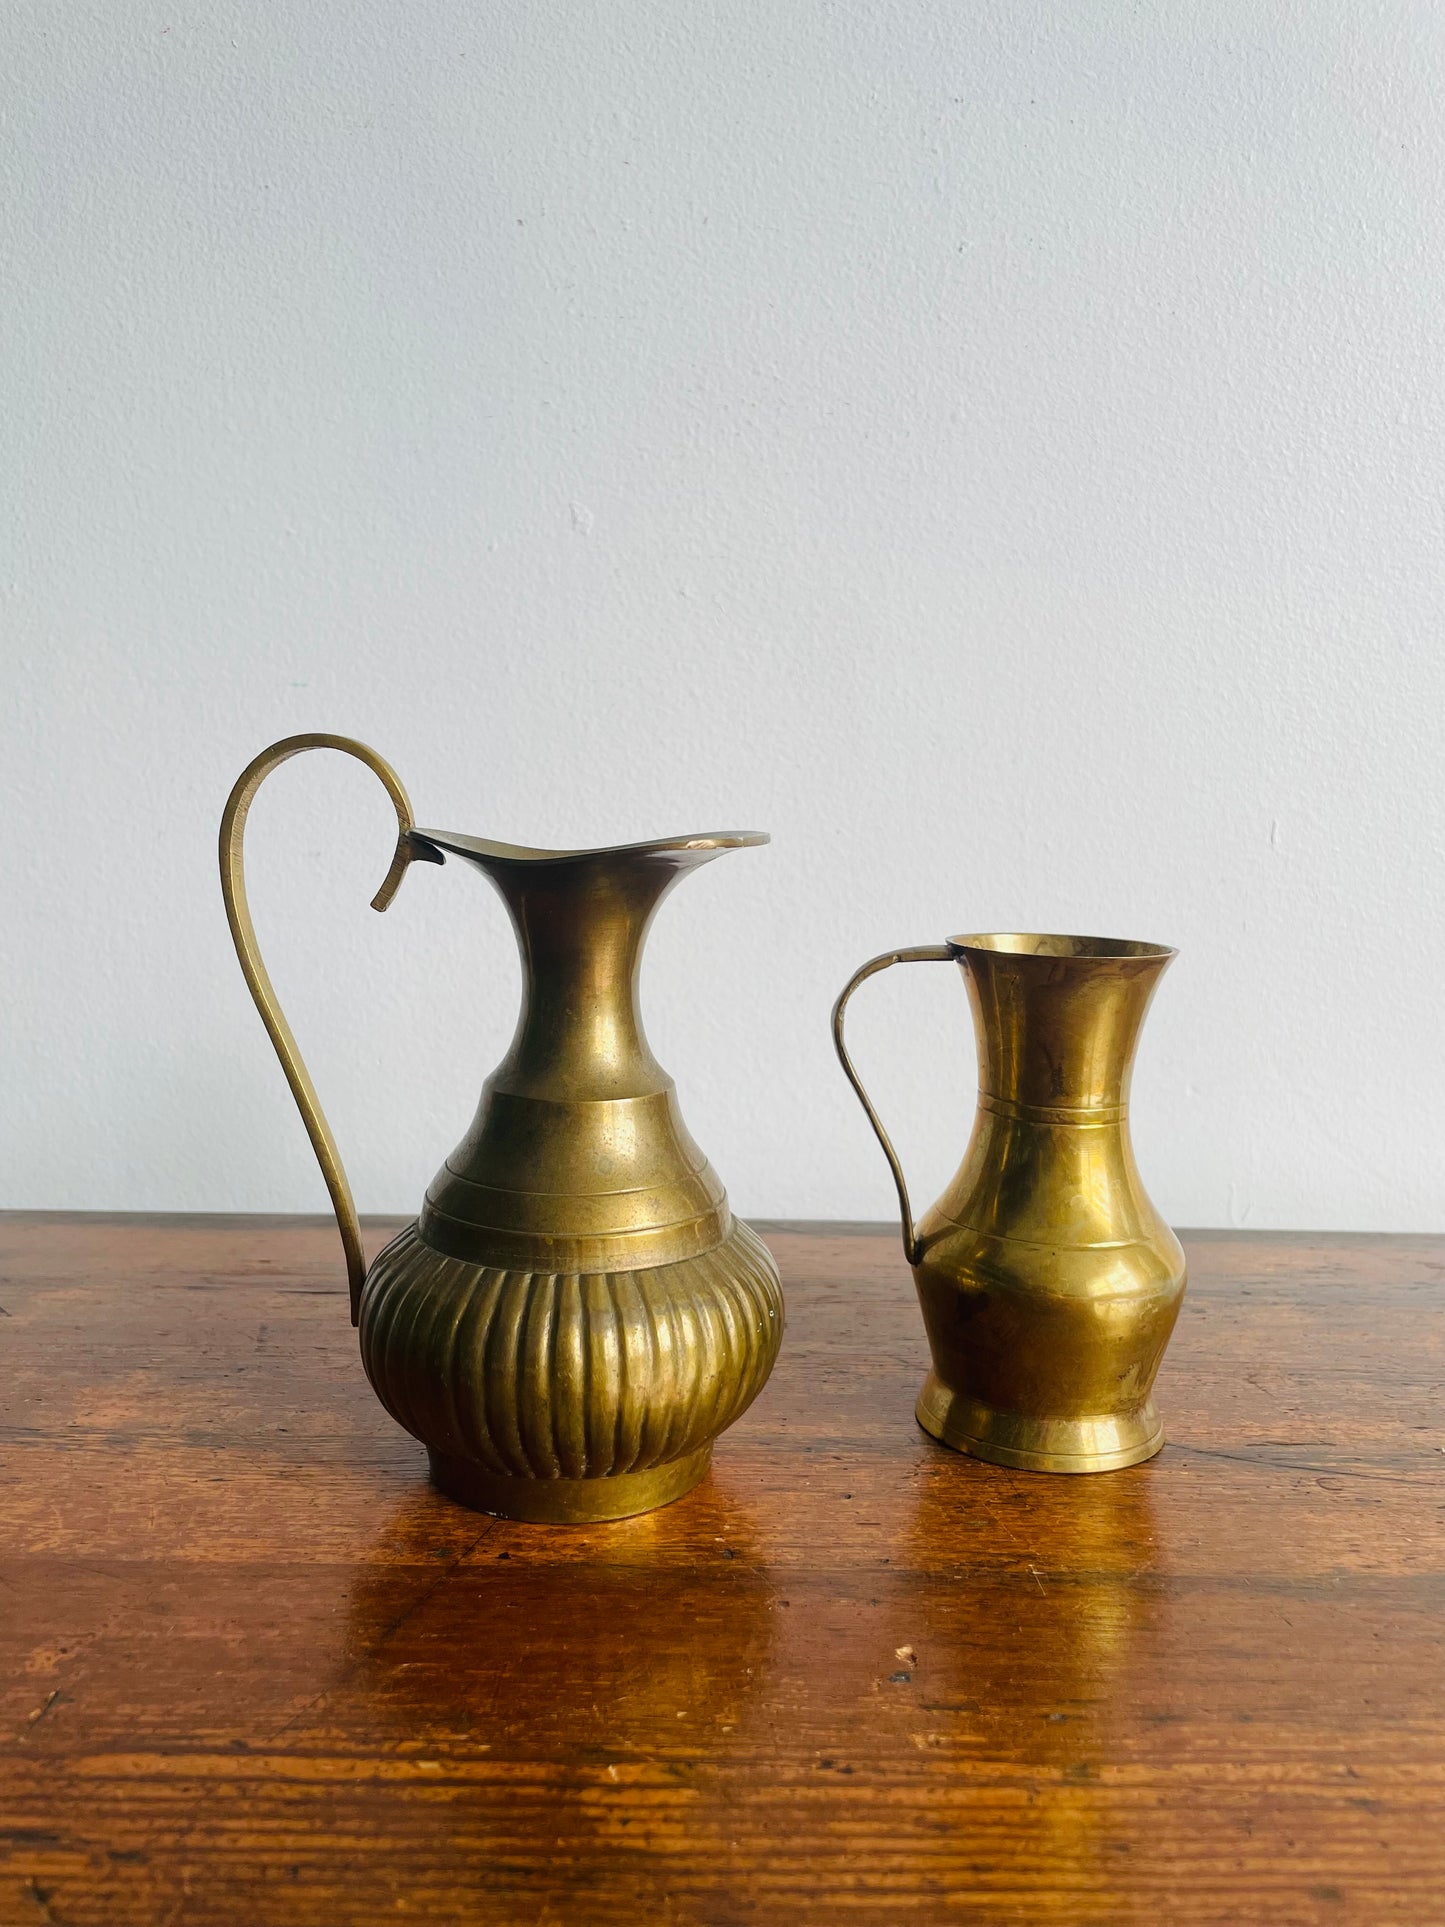 Solid Brass Pitcher Vase Jugs - Made in India - Set of 2